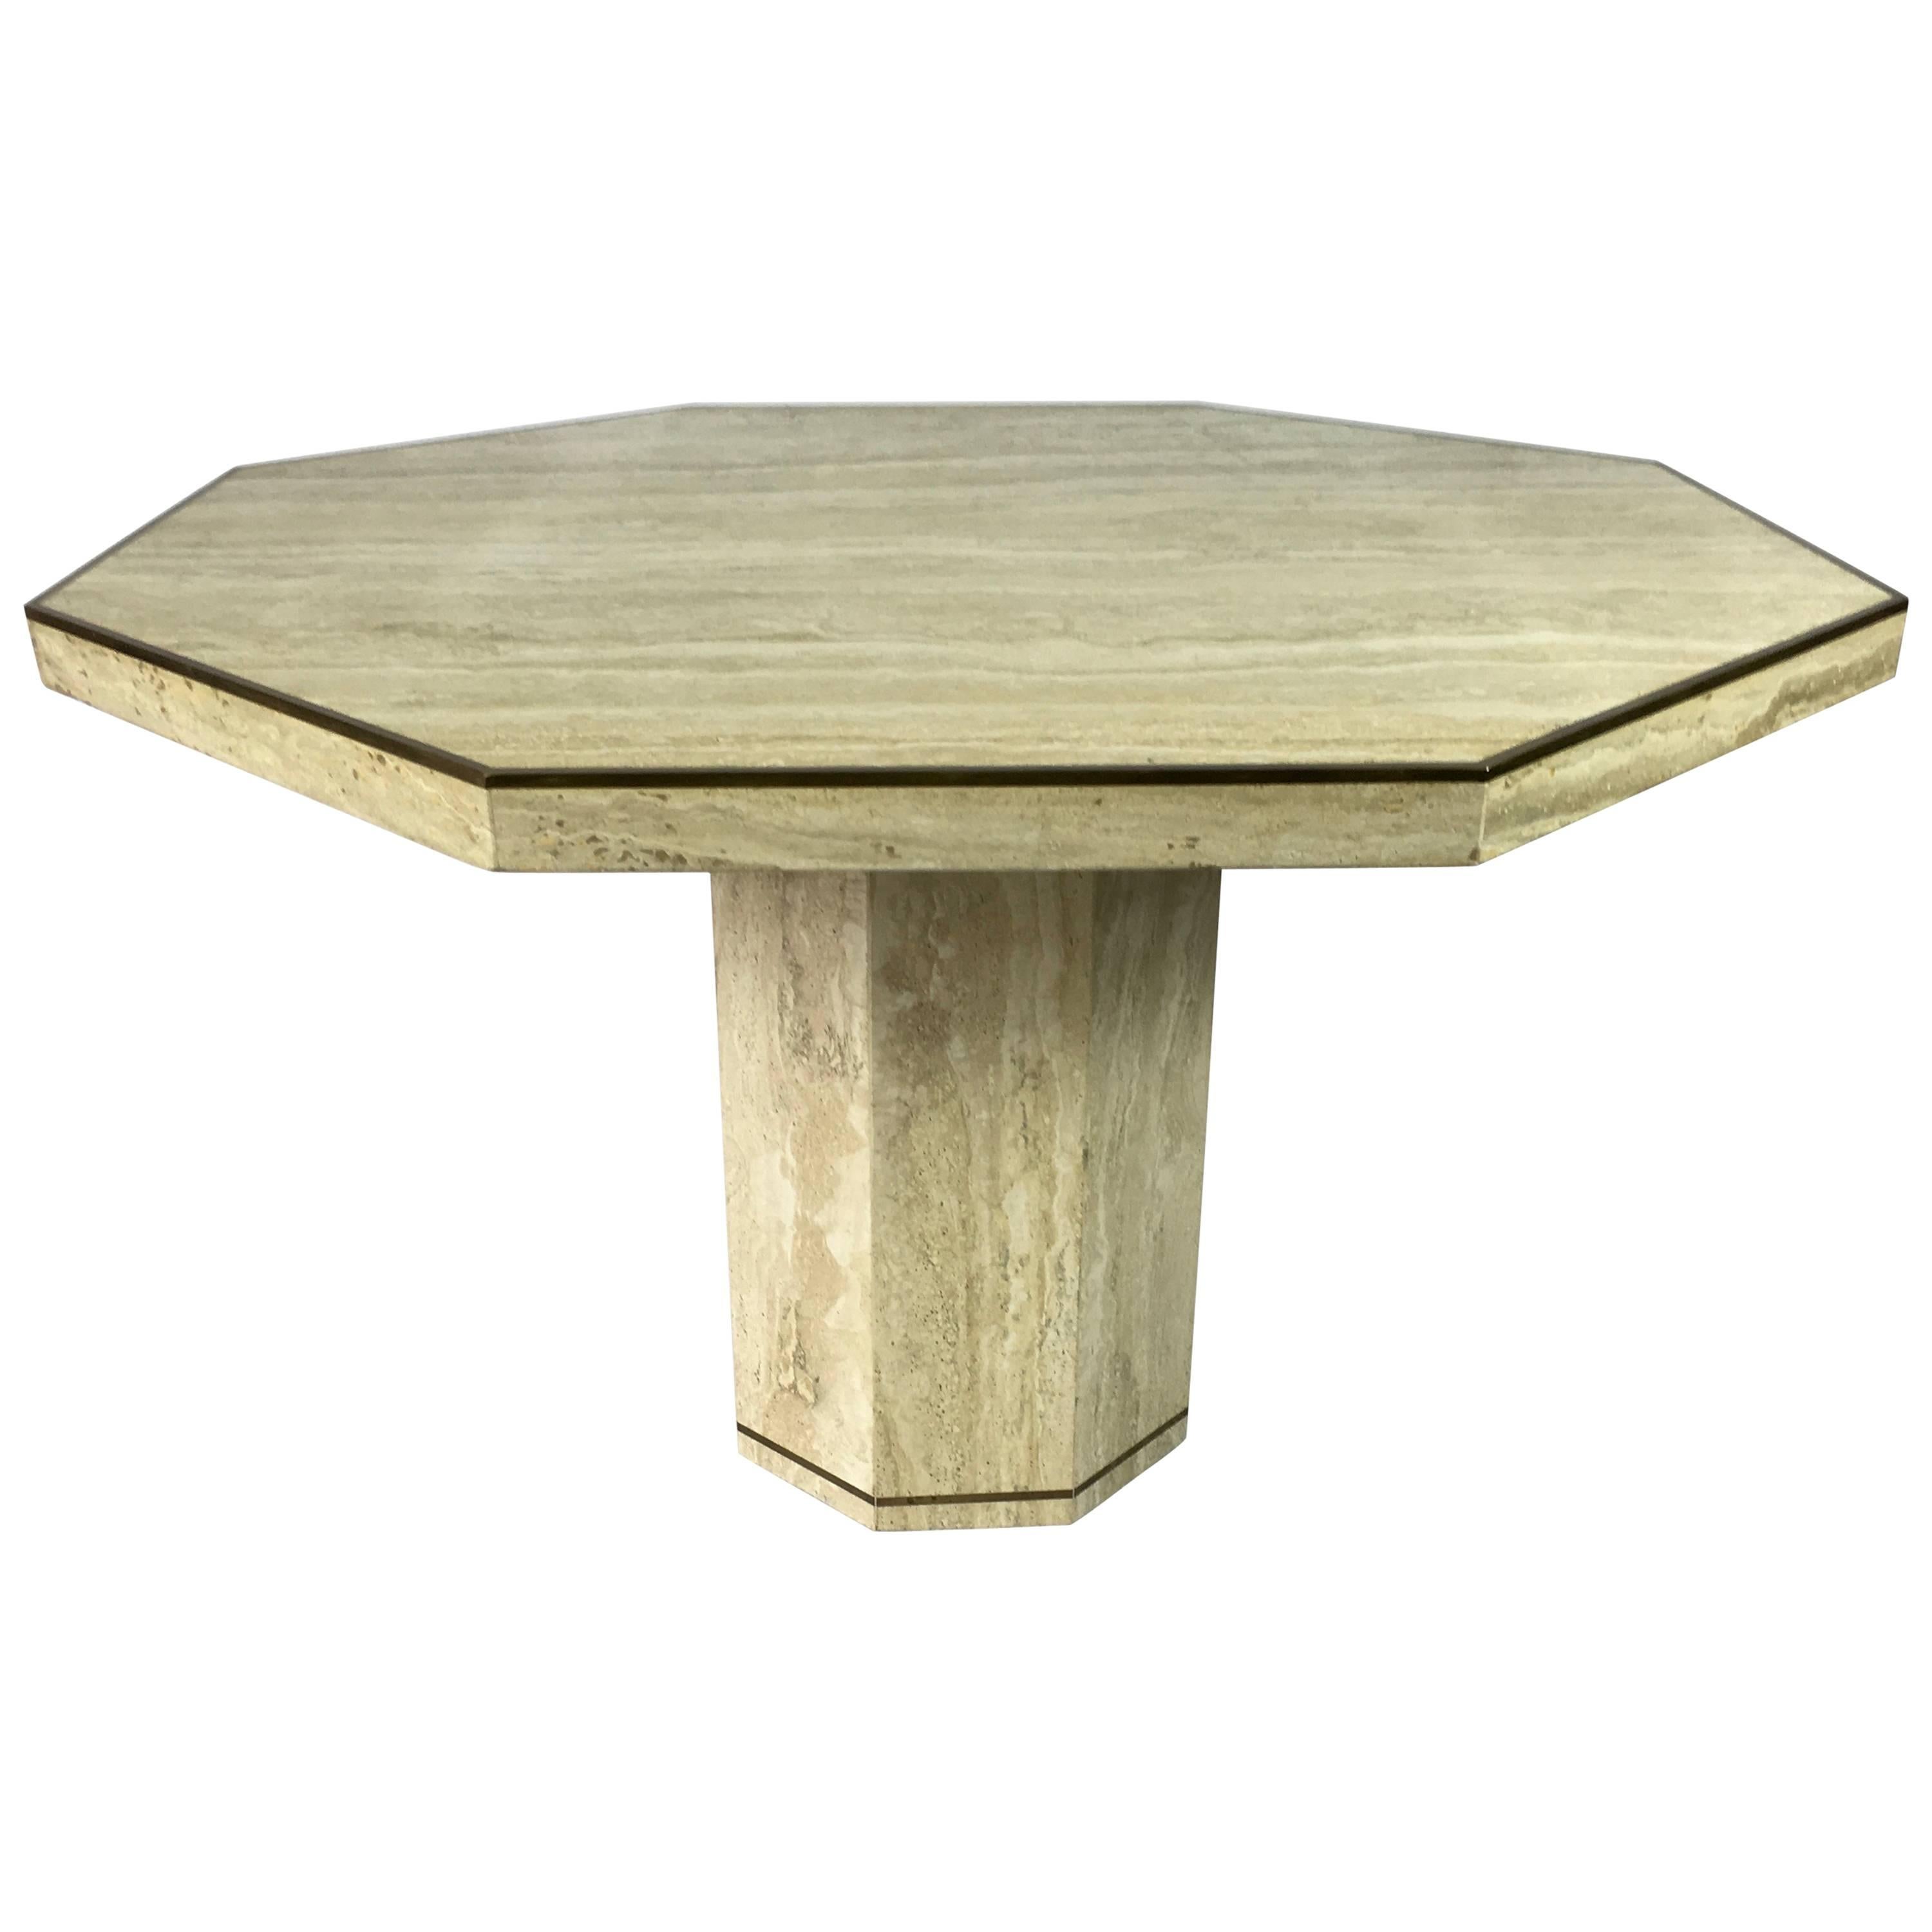 Travertine Marble Octagonal Center or Dining Table, with Brass Inlay by Ello